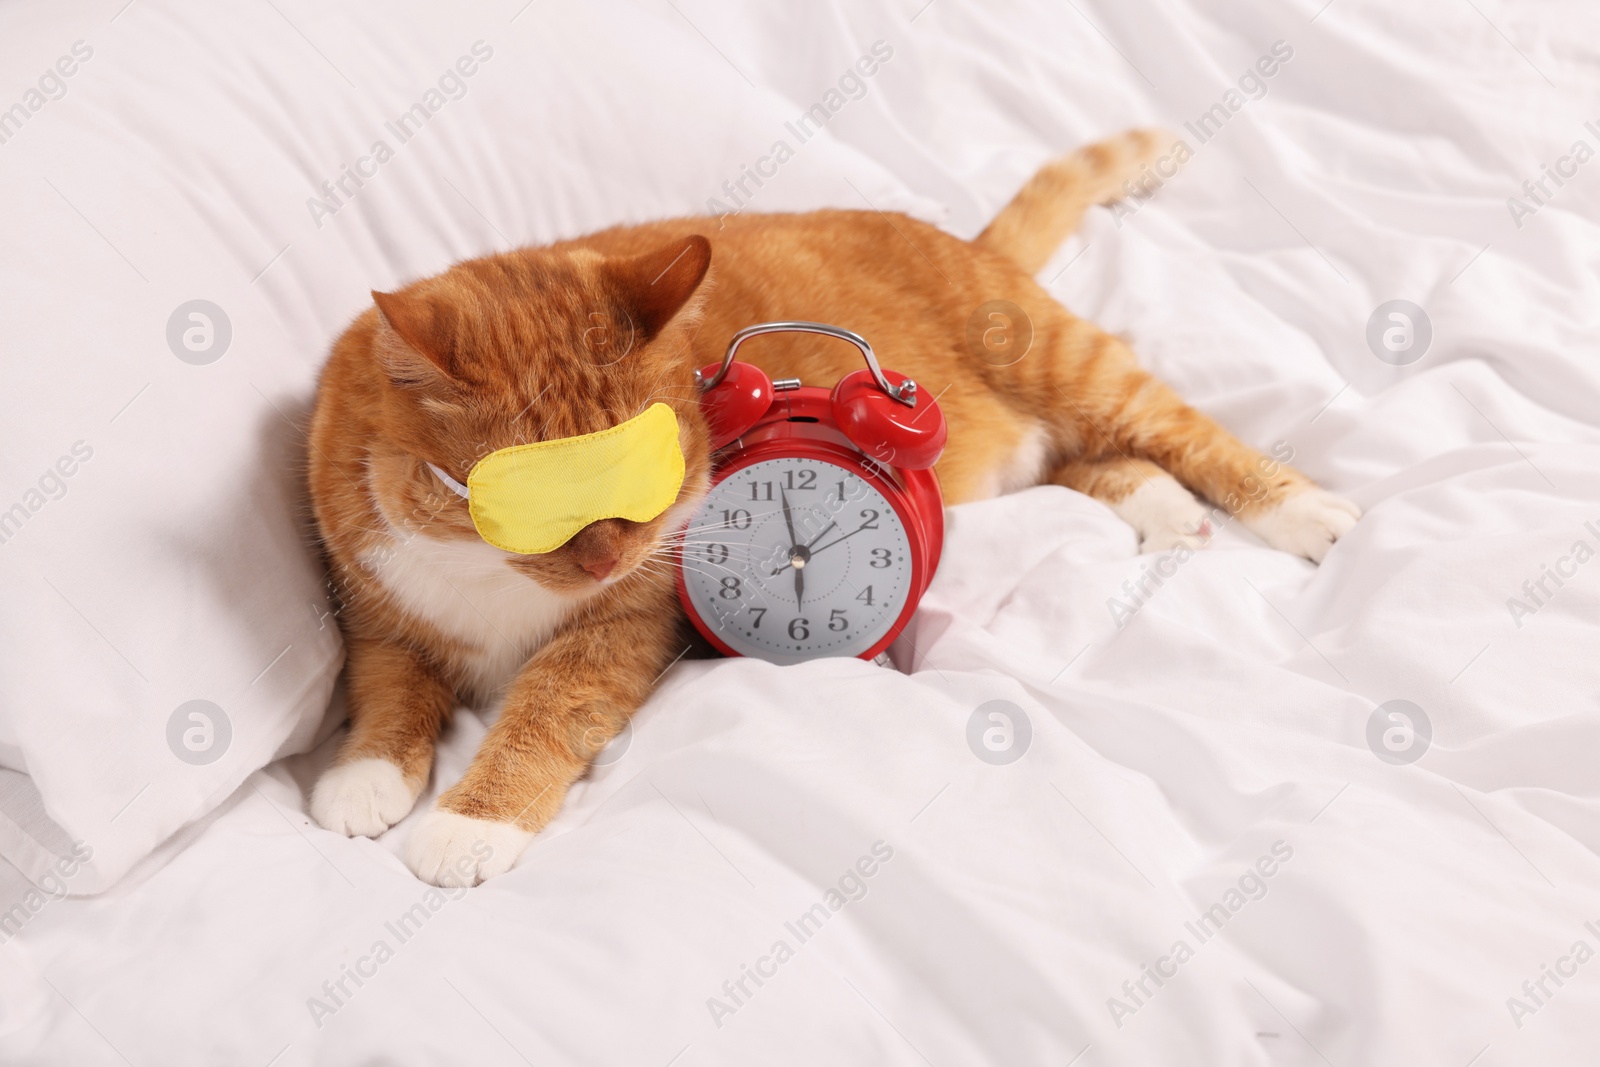 Photo of Cute ginger cat with sleep mask and alarm clock resting on bed